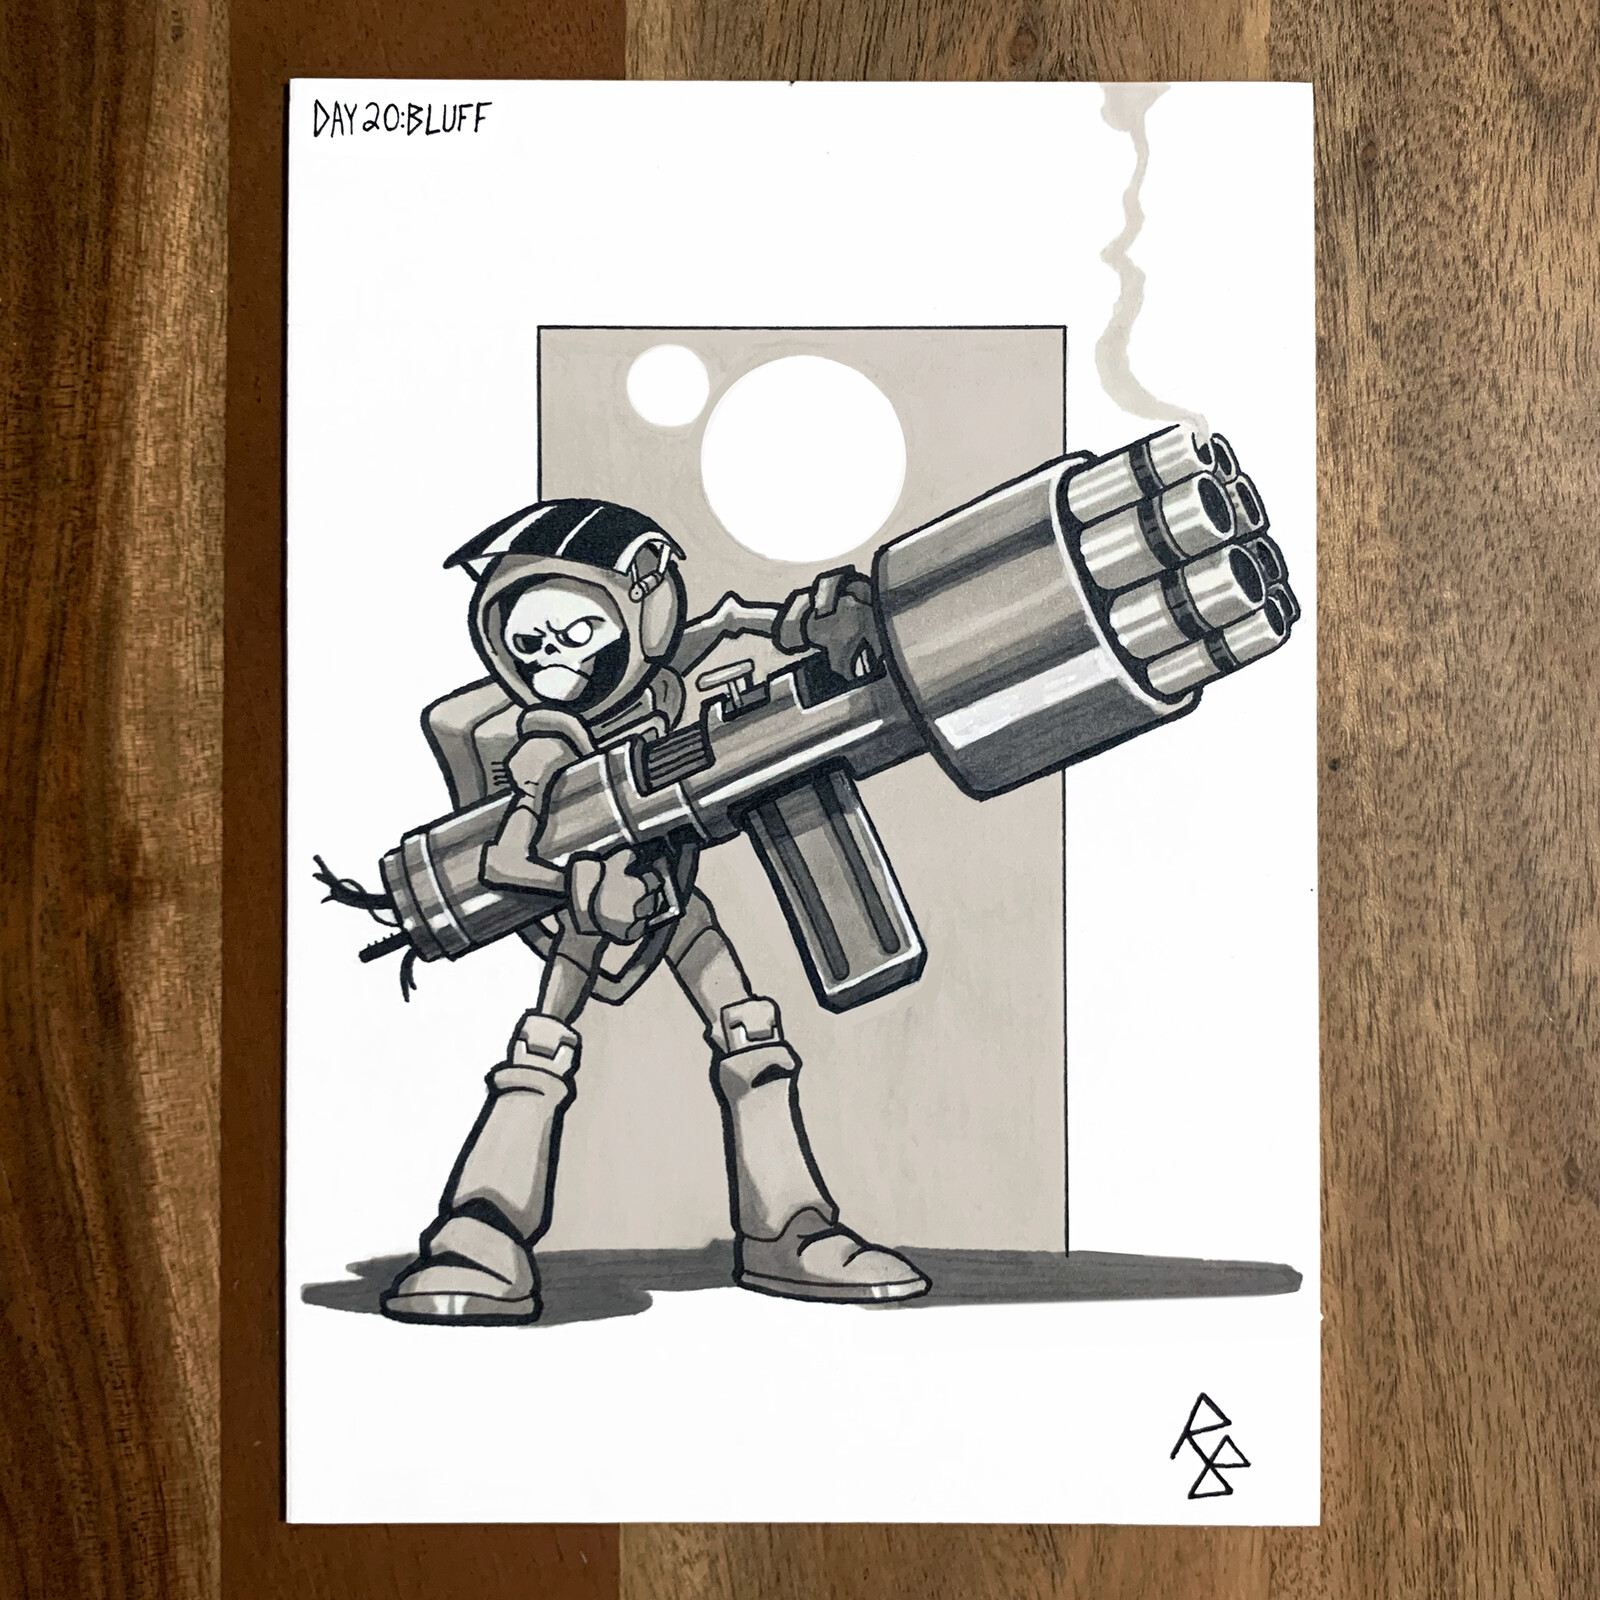 Inktober Day 20: Bluff

"I know what you're thinking. Did he fire 6,000 shots or only 5,999?"

Some fanart of Skull Chaser, an original character by Jake Parker.